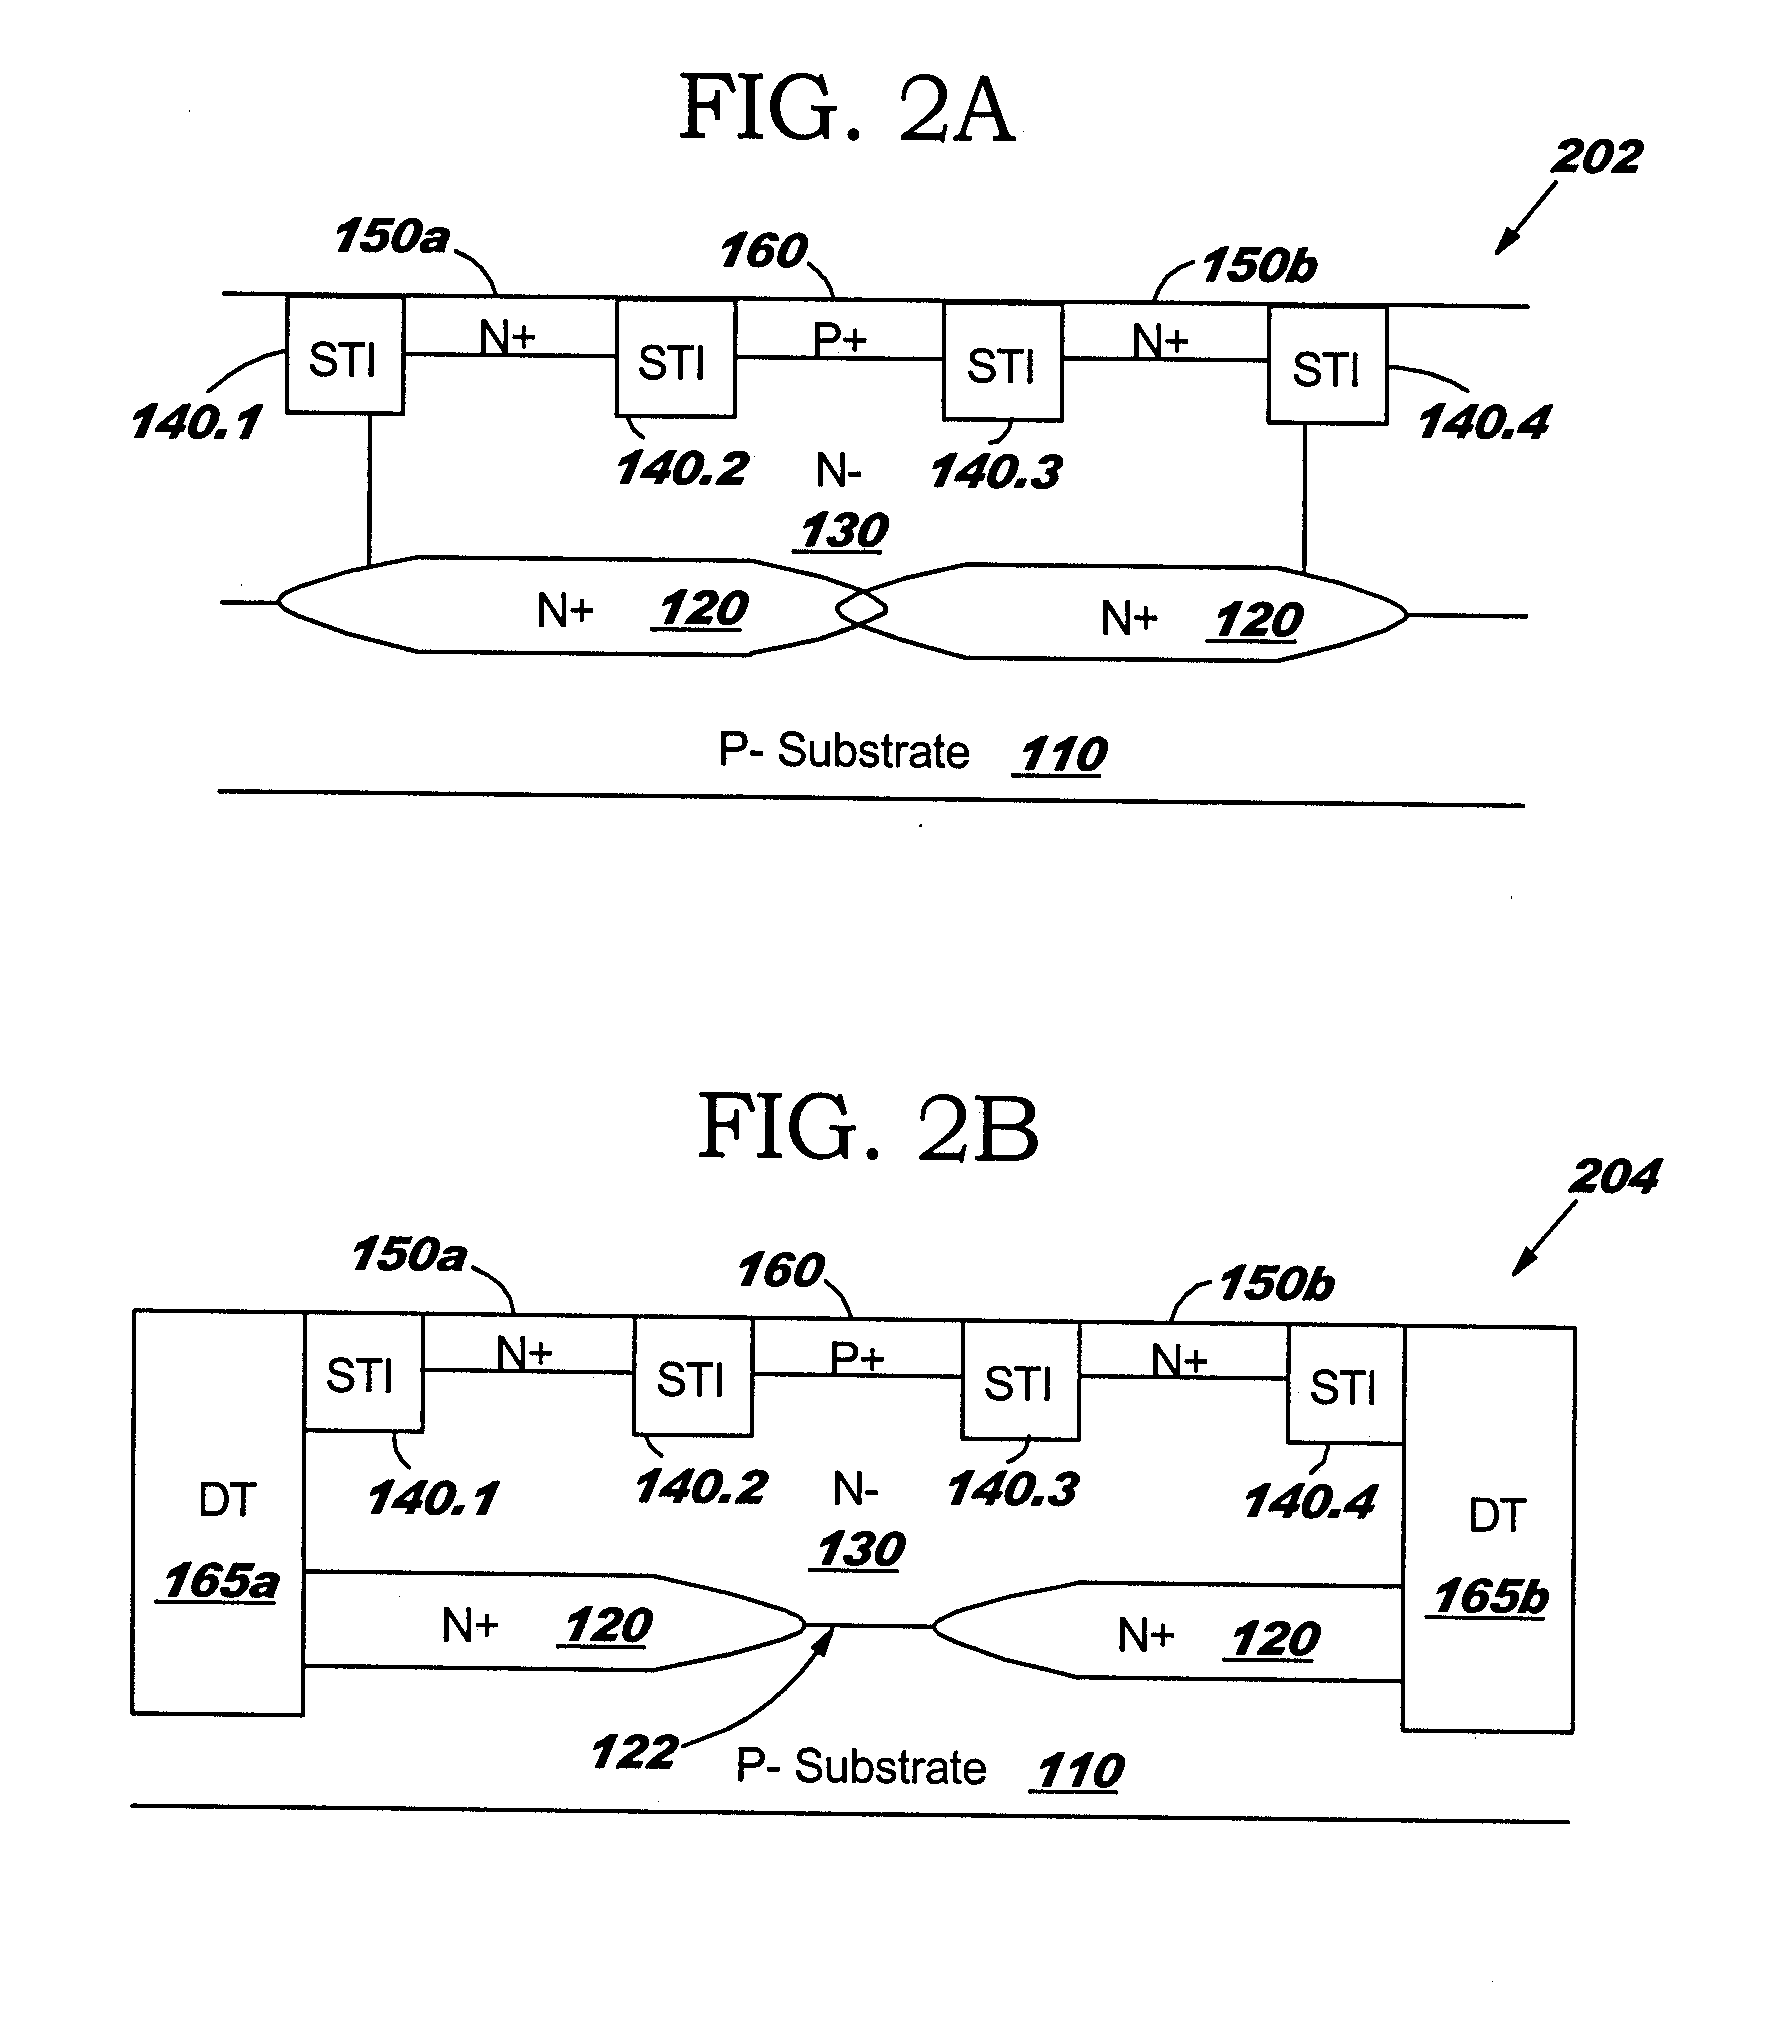 Tunable semiconductor diodes